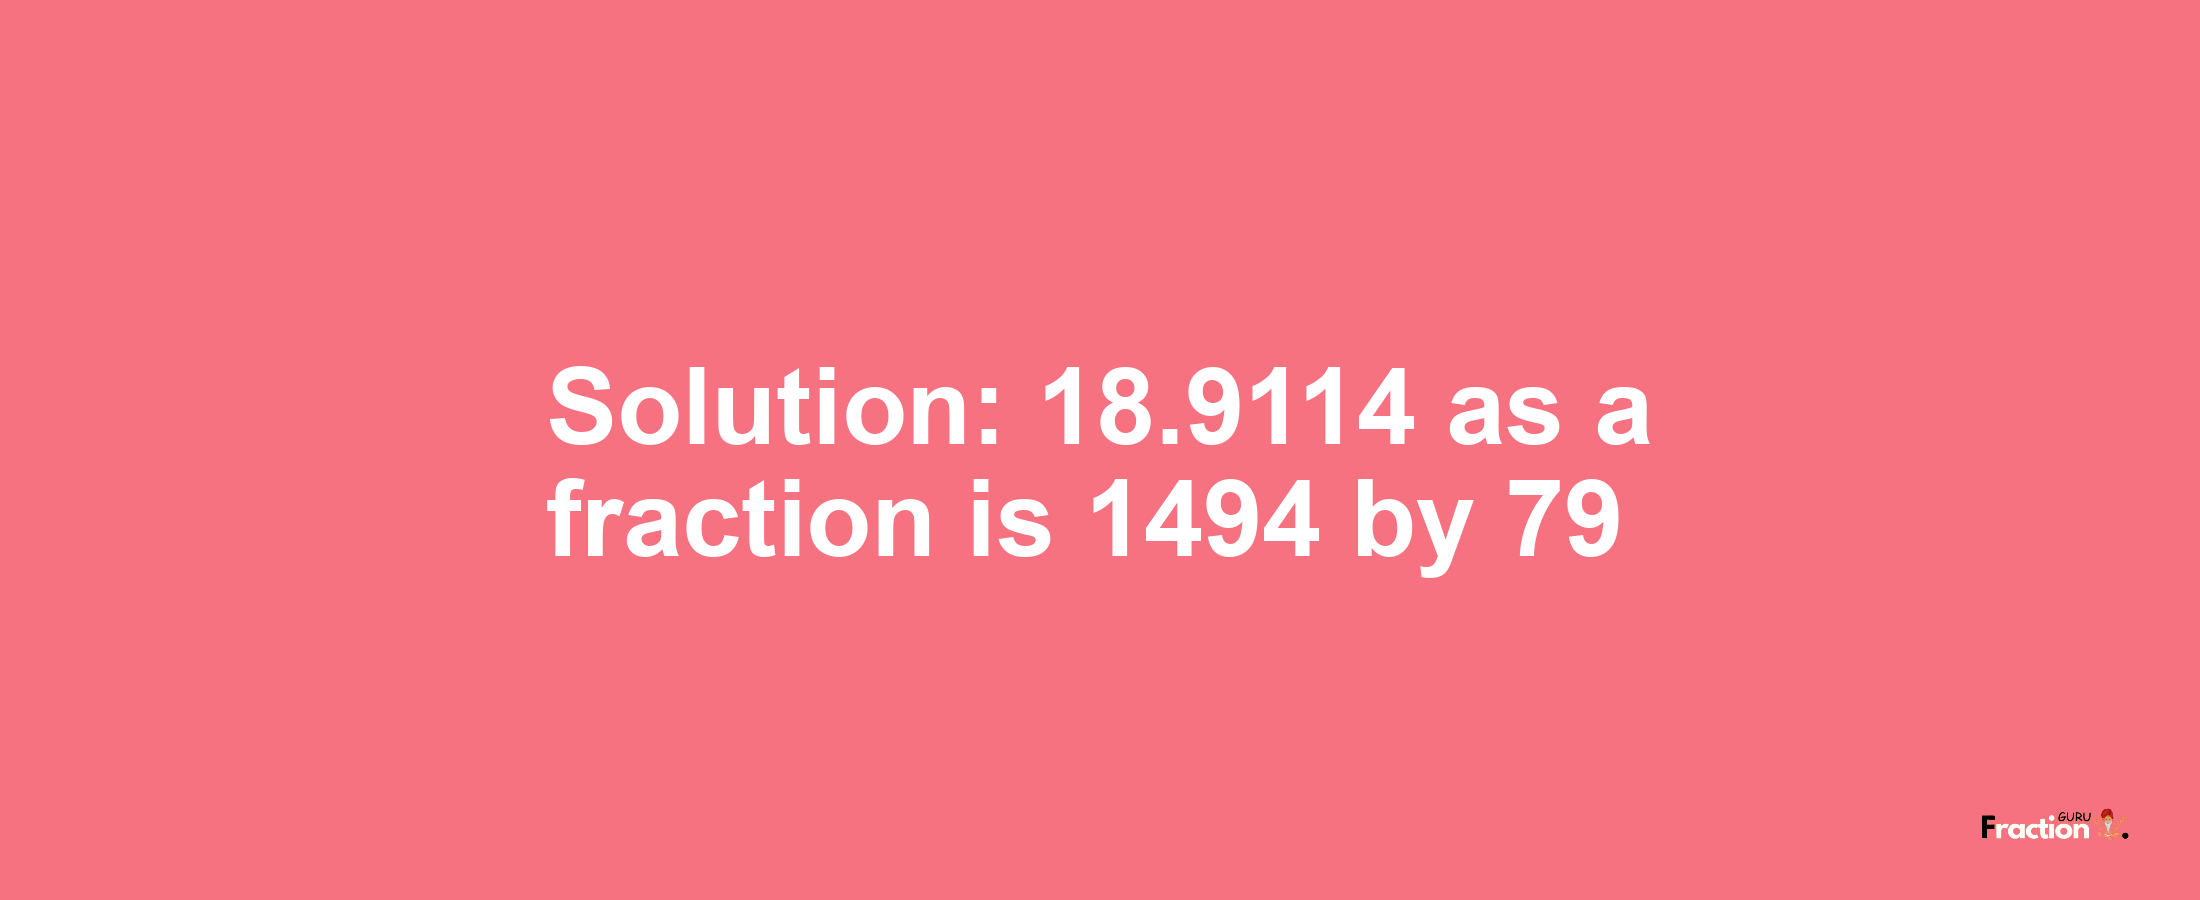 Solution:18.9114 as a fraction is 1494/79